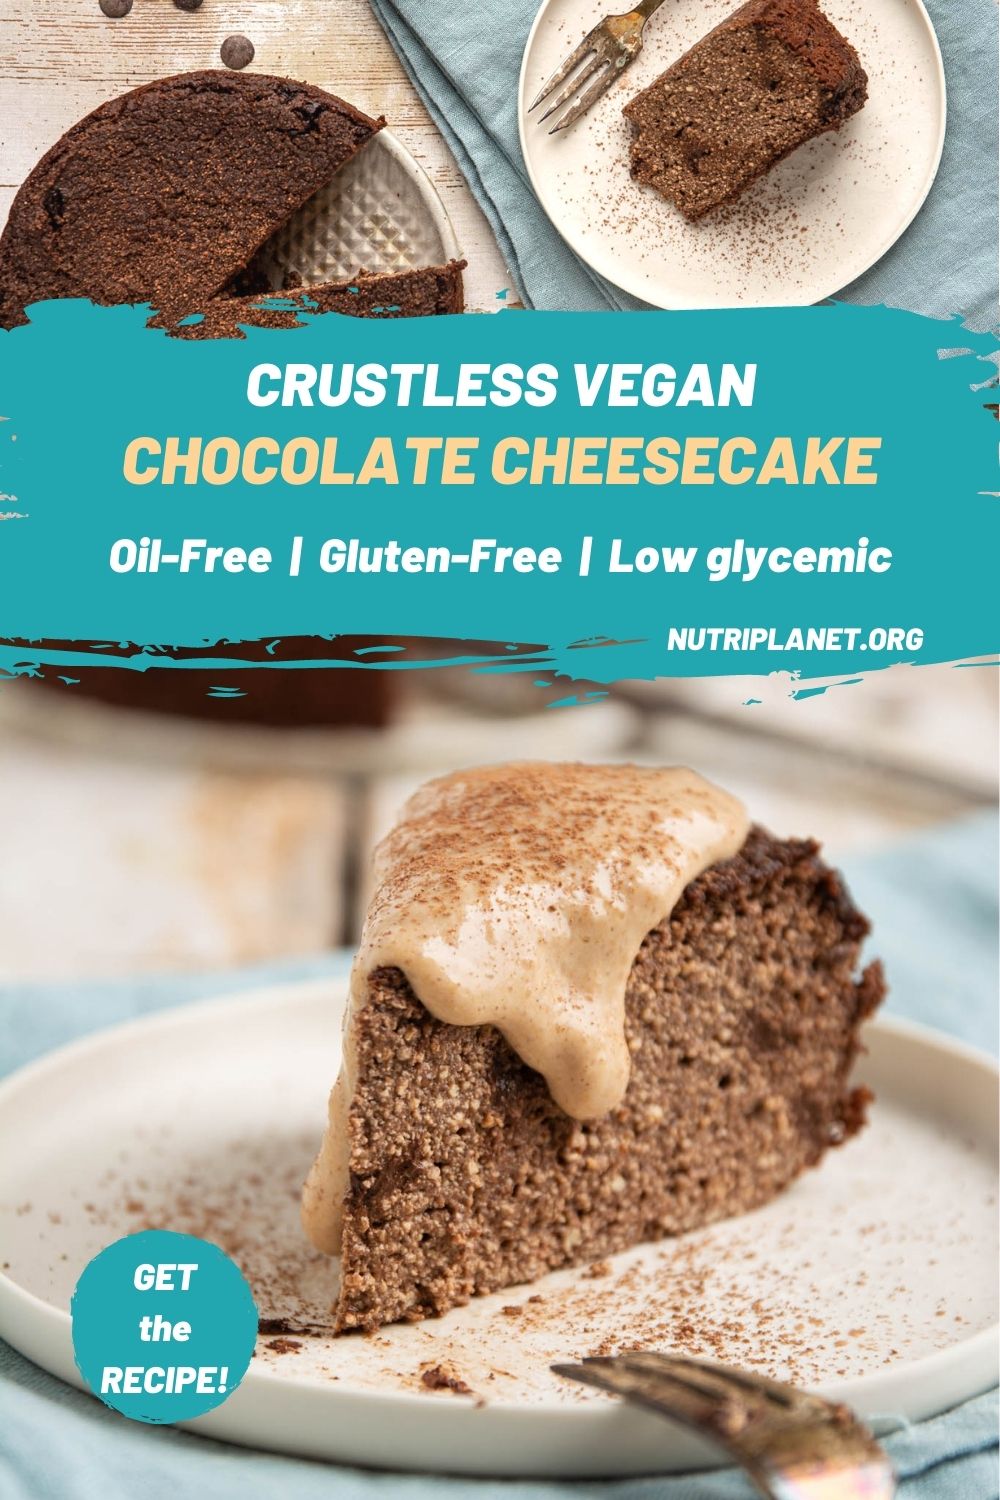 Learn how to make a healthy vegan chocolate cheesecake with chocolate chips and tofu but without crust.